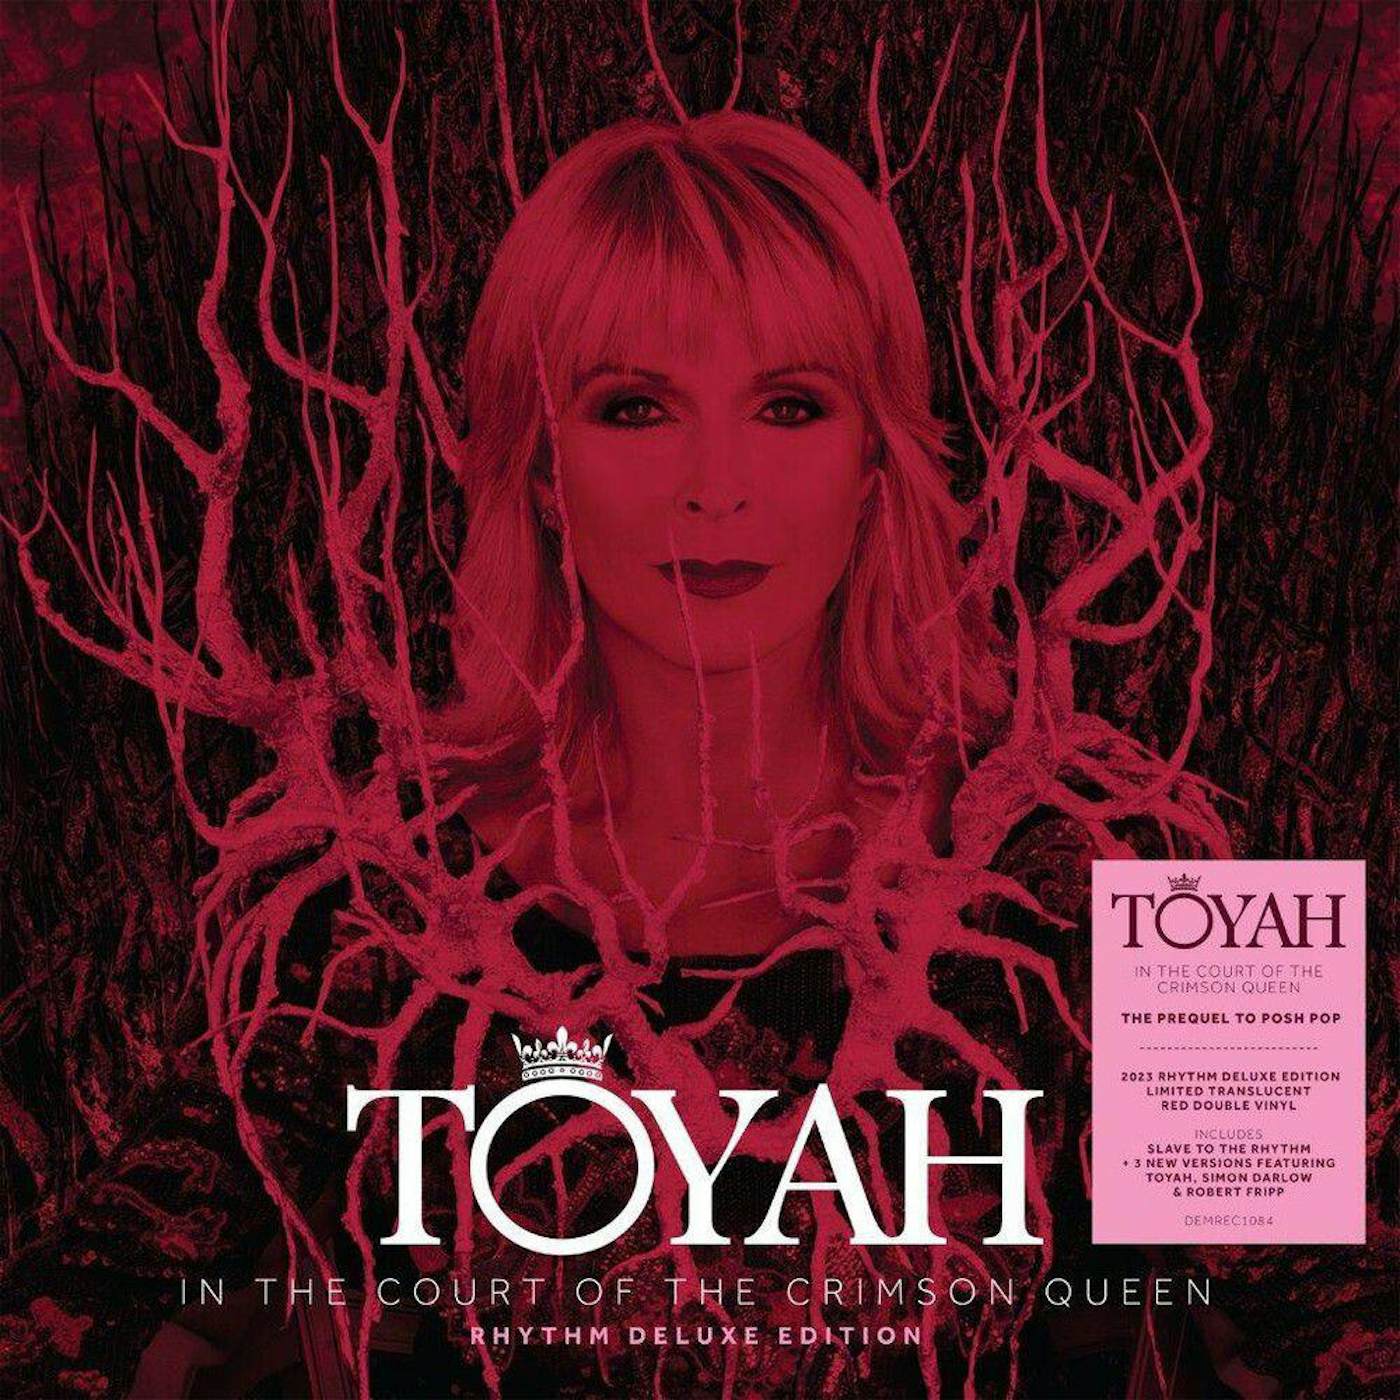 Toyah In The Court Of The Crimson Queen: Rhythm (Deluxe Edition/Red/140g/Revised Artwork & Lyrics) Vinyl Record